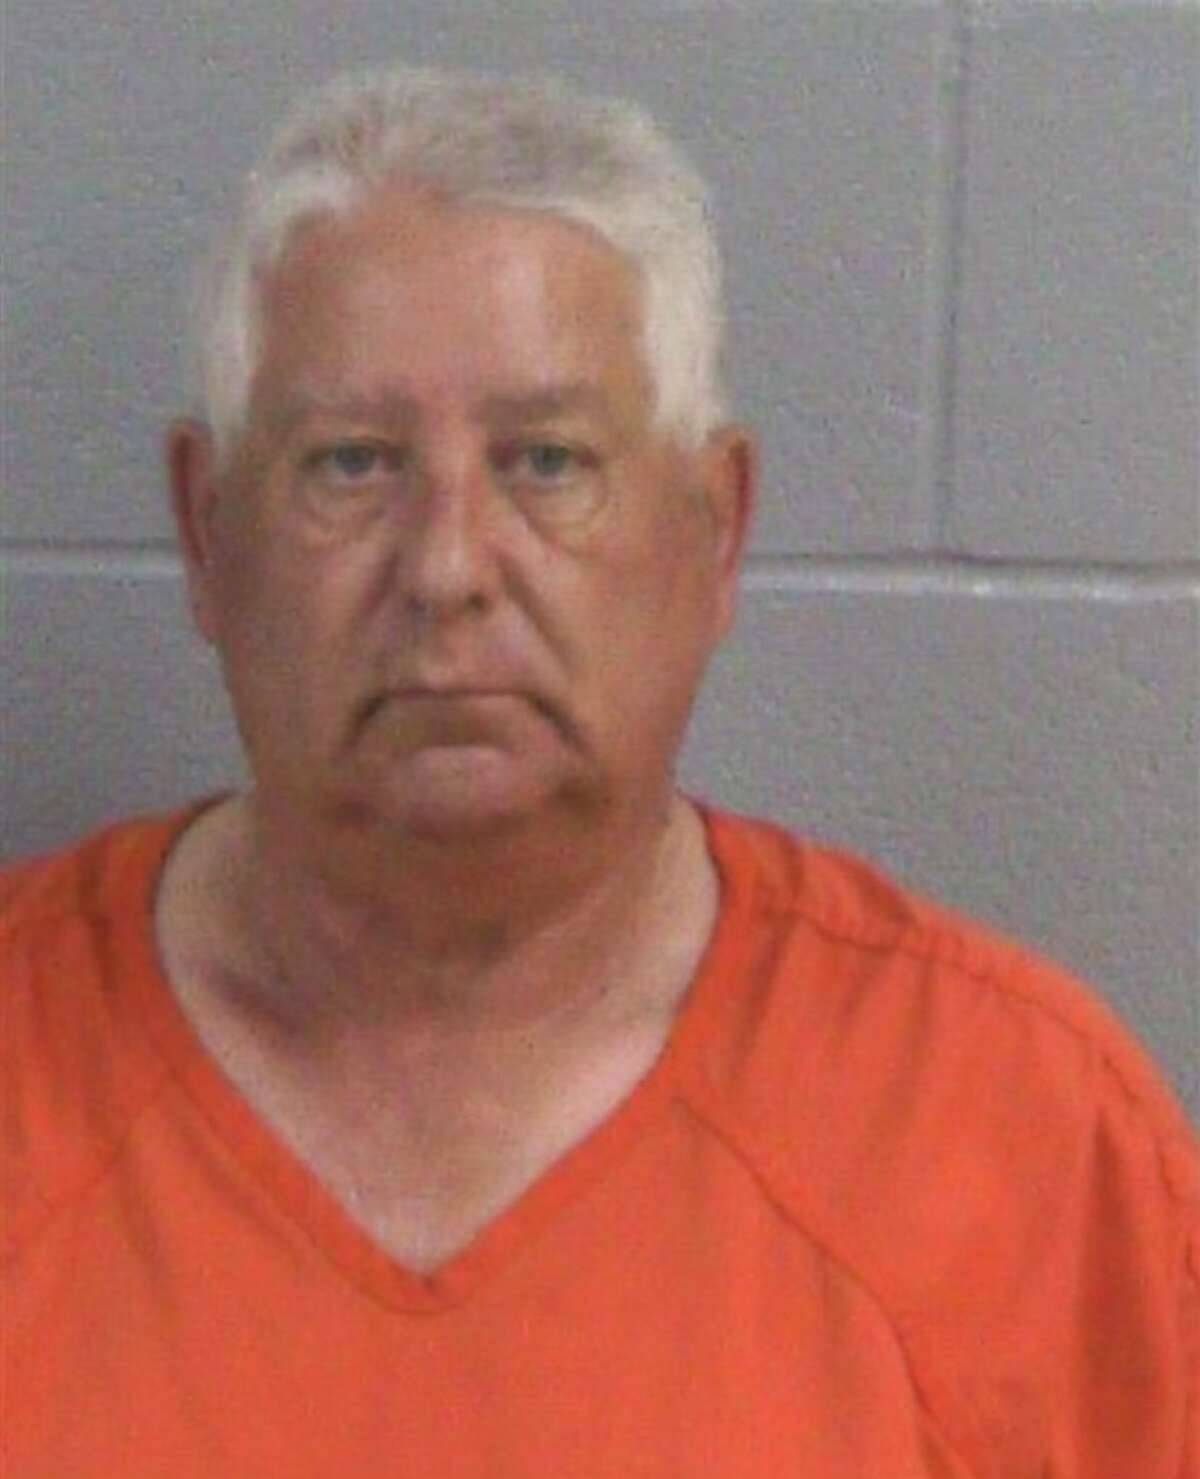 James Edward Shirk was arrested Wednesday by the Midland County Sheriff's Office for sexual abuse of a child, according to a county spokesperson.